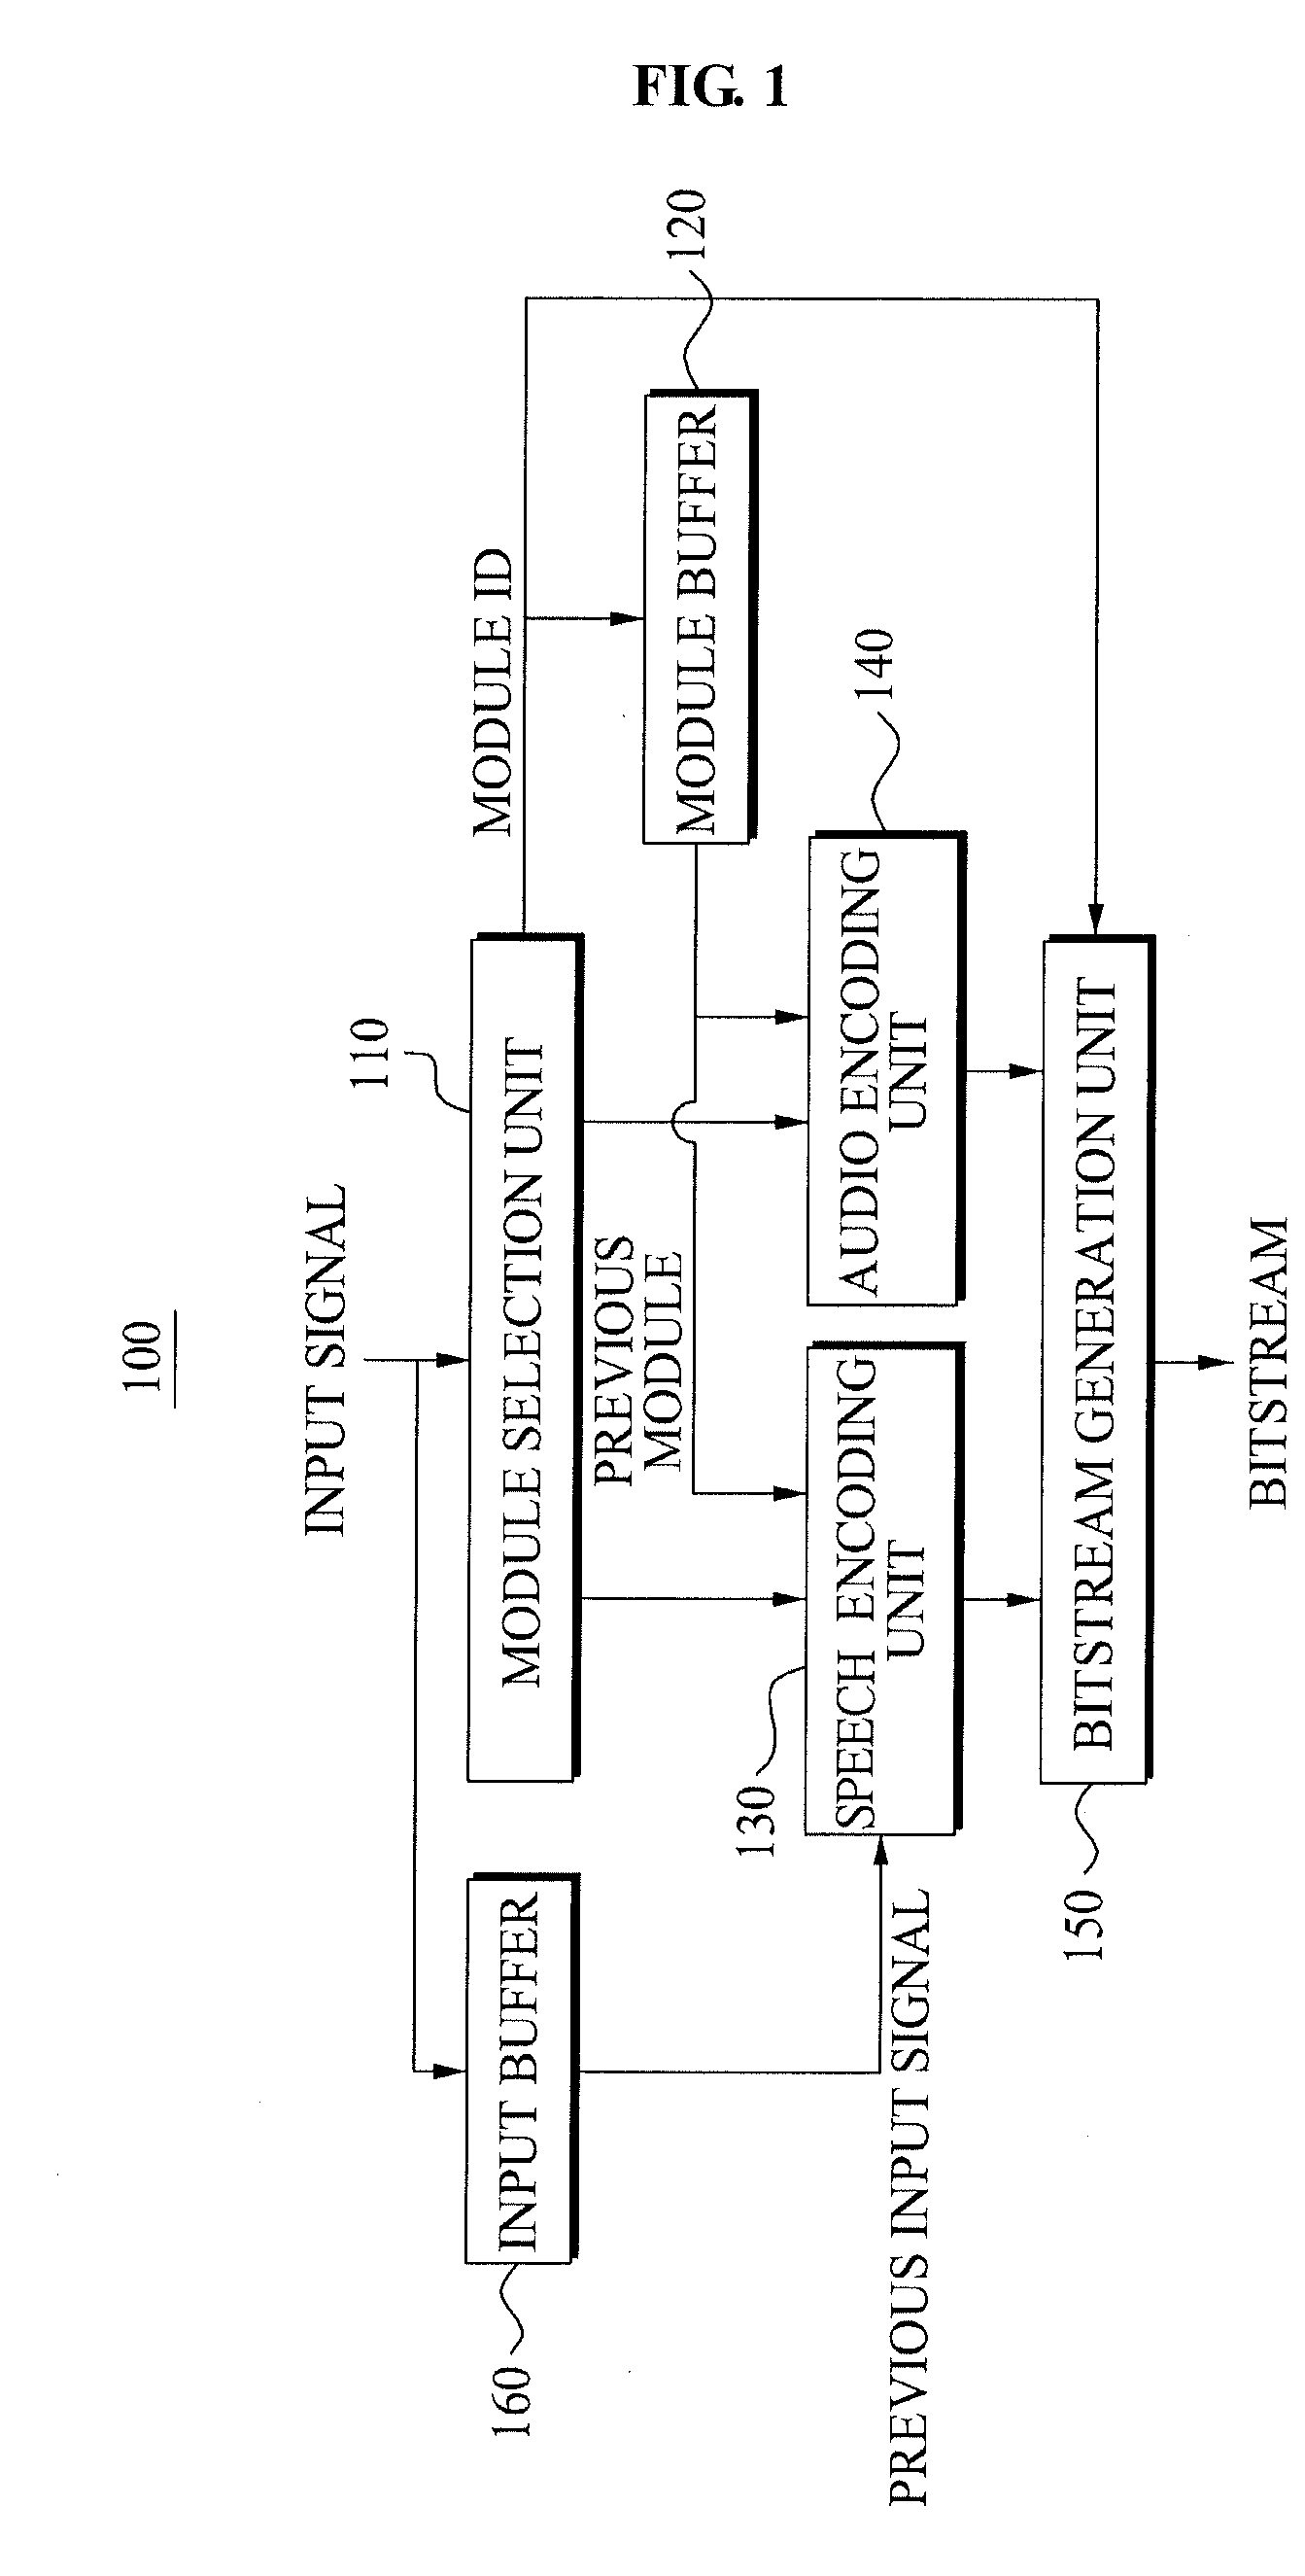 Apparatus for encoding and decoding of integrated speech and audio